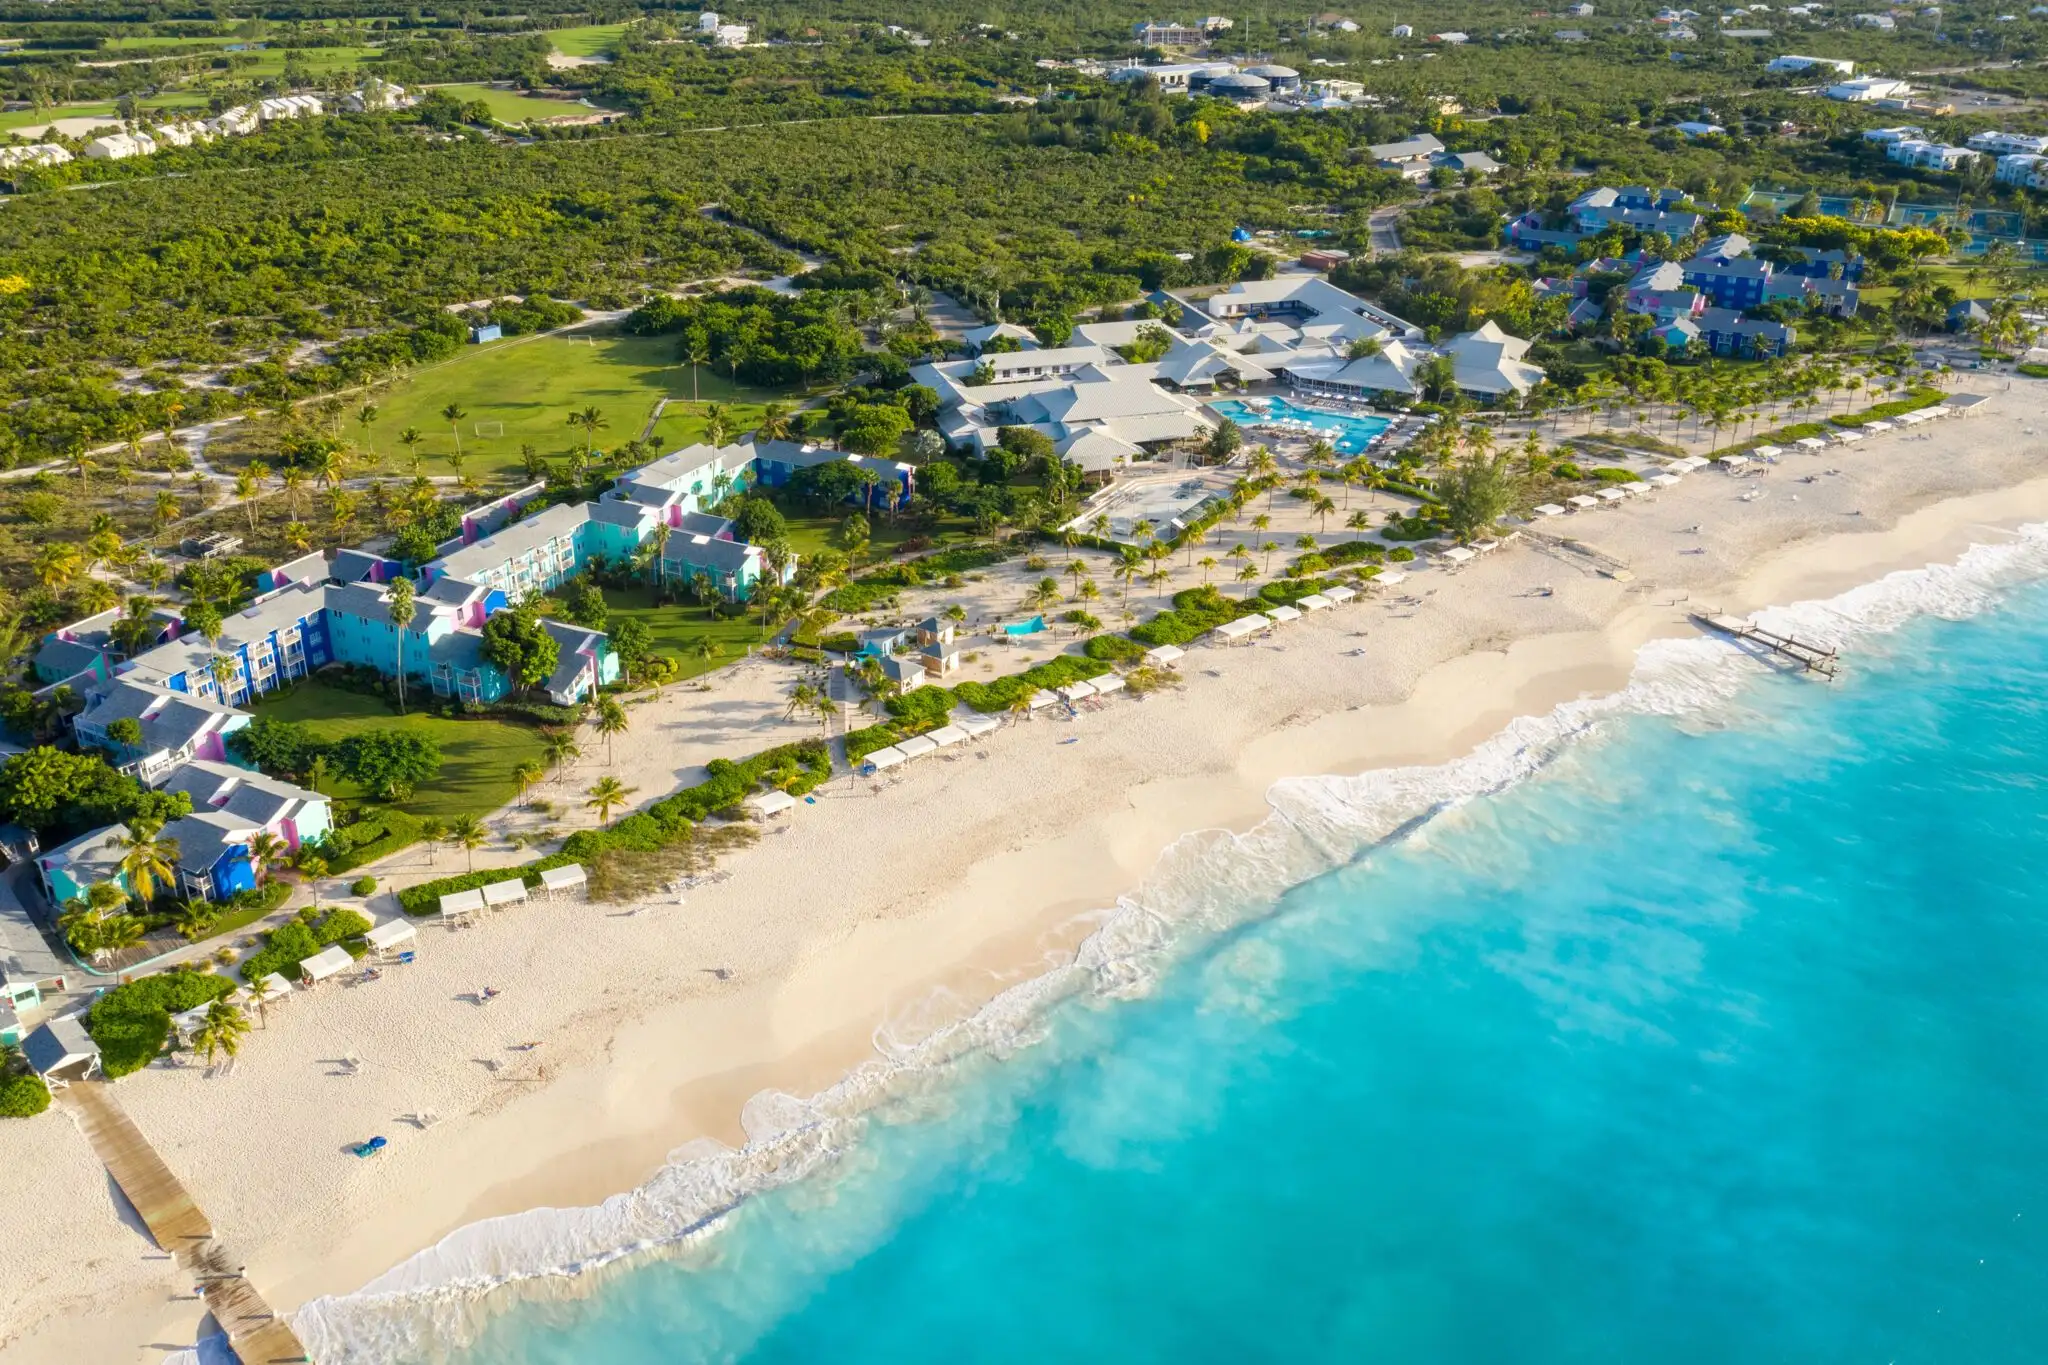 Club Med Turkoise, Turks and Caicos © Club Med Turkoise